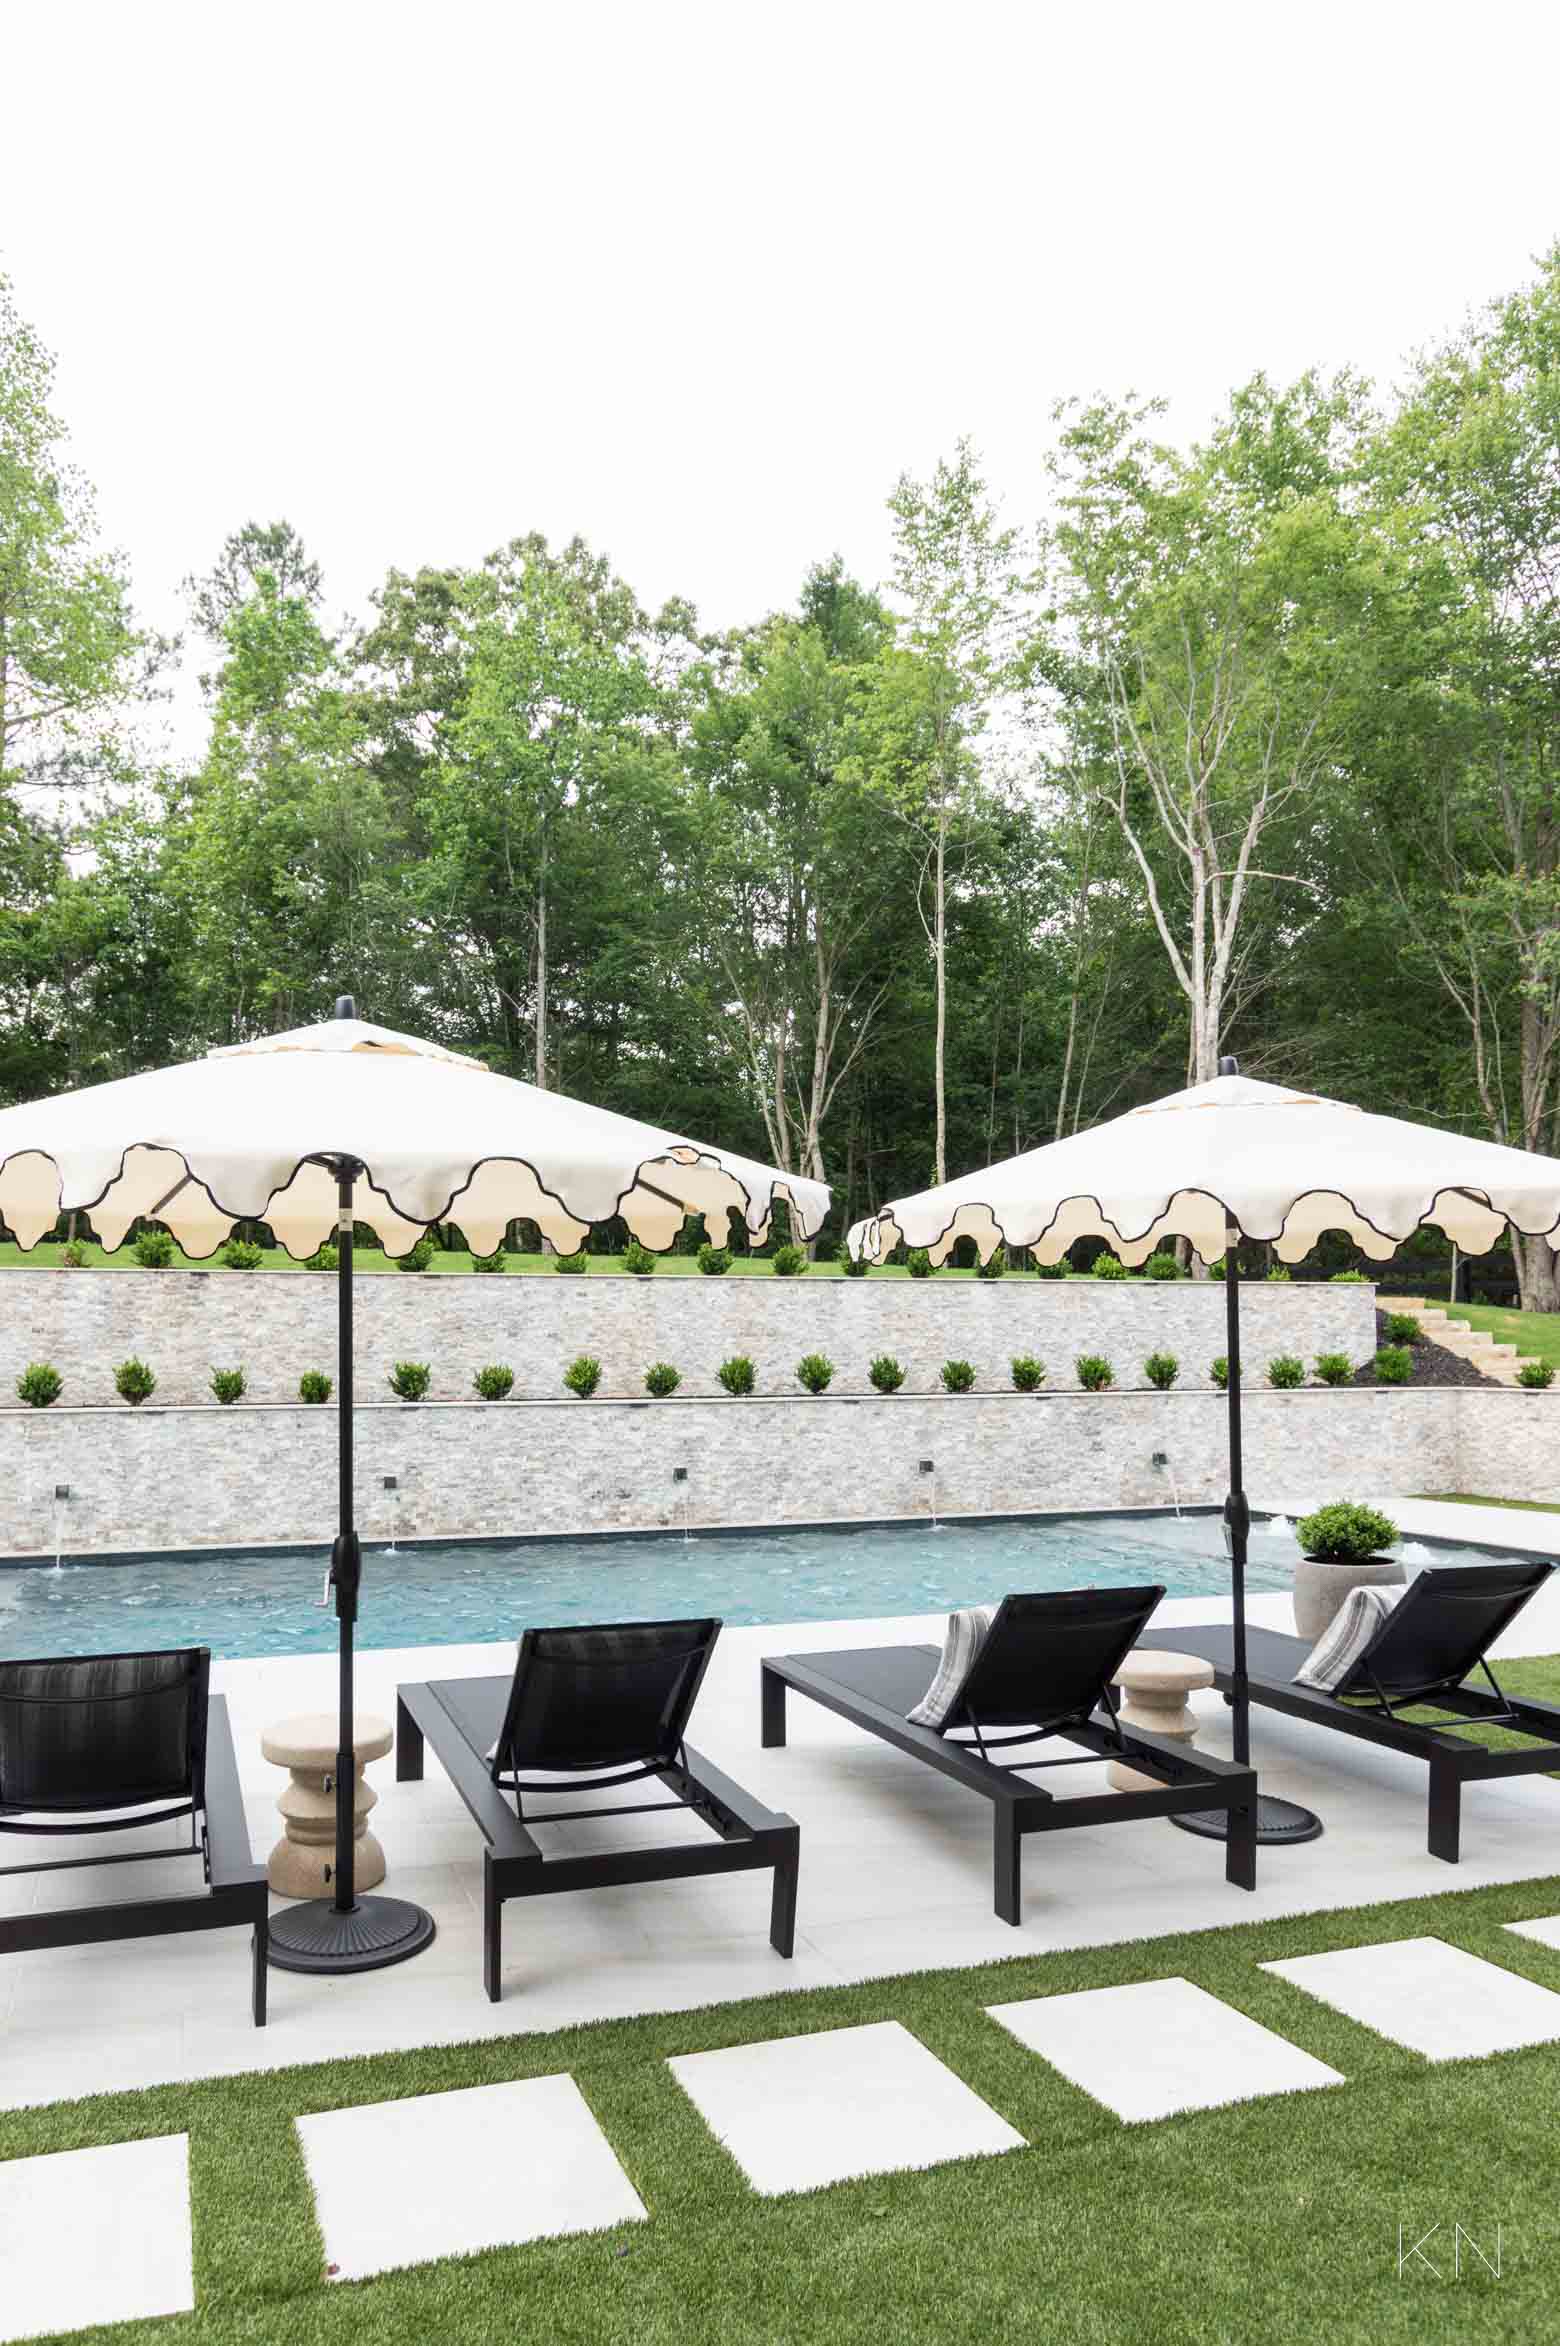 Timeless Pool Design in French Gray Pebble Finish